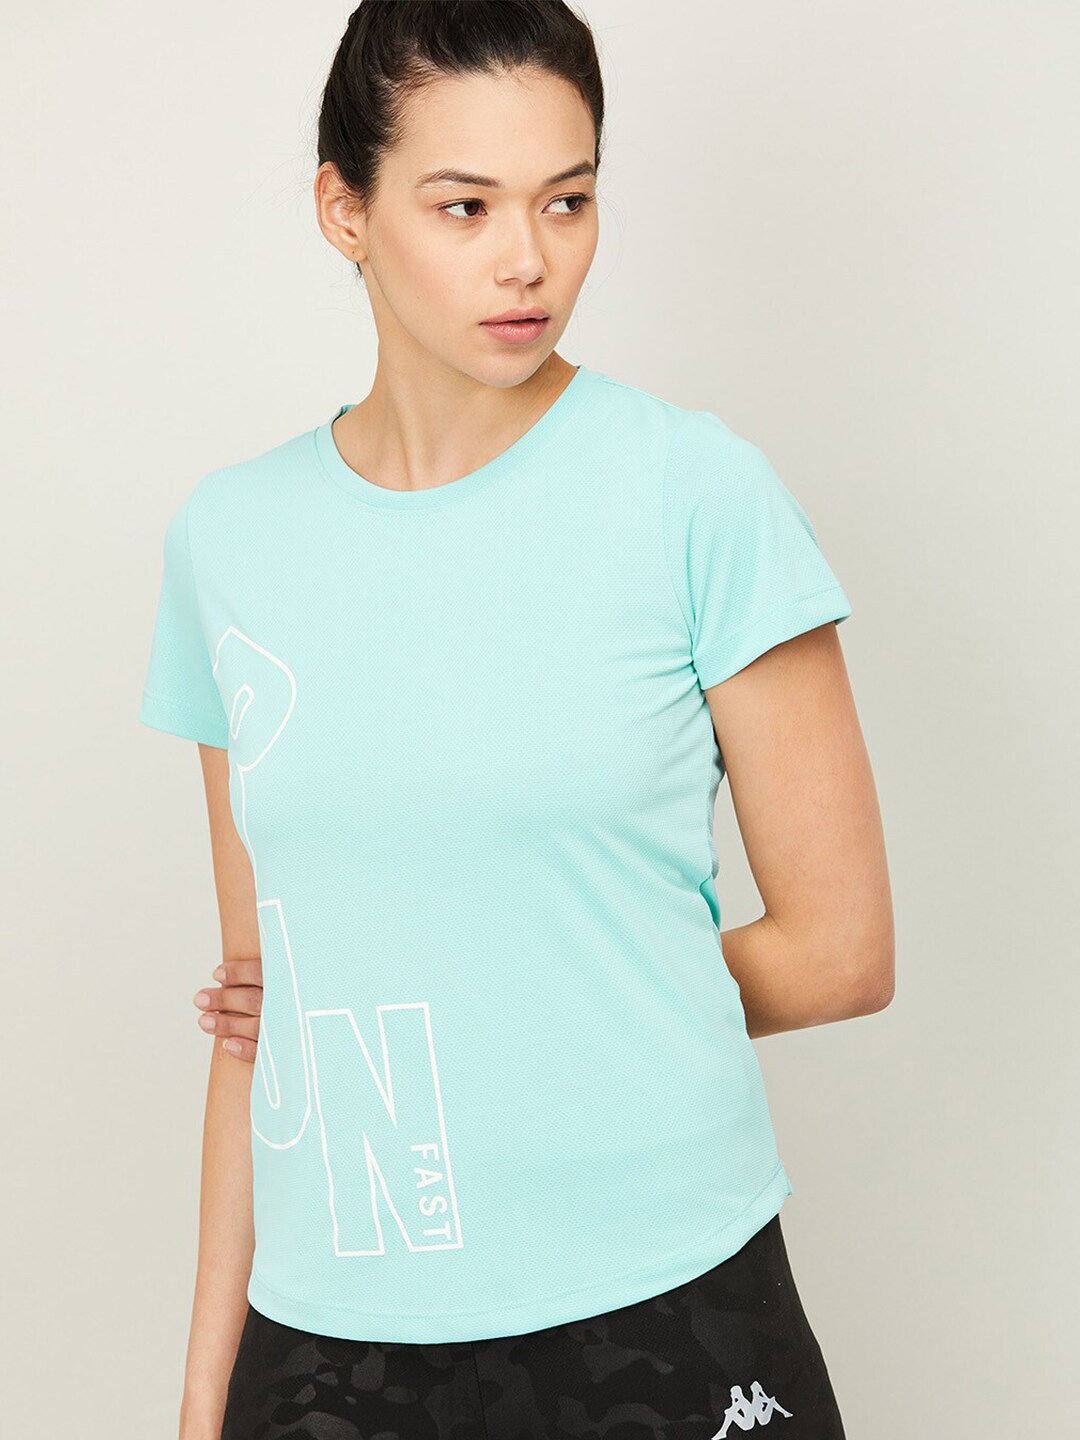 Kappa Women Blue Typography Printed Training or Gym T-shirt Price in India